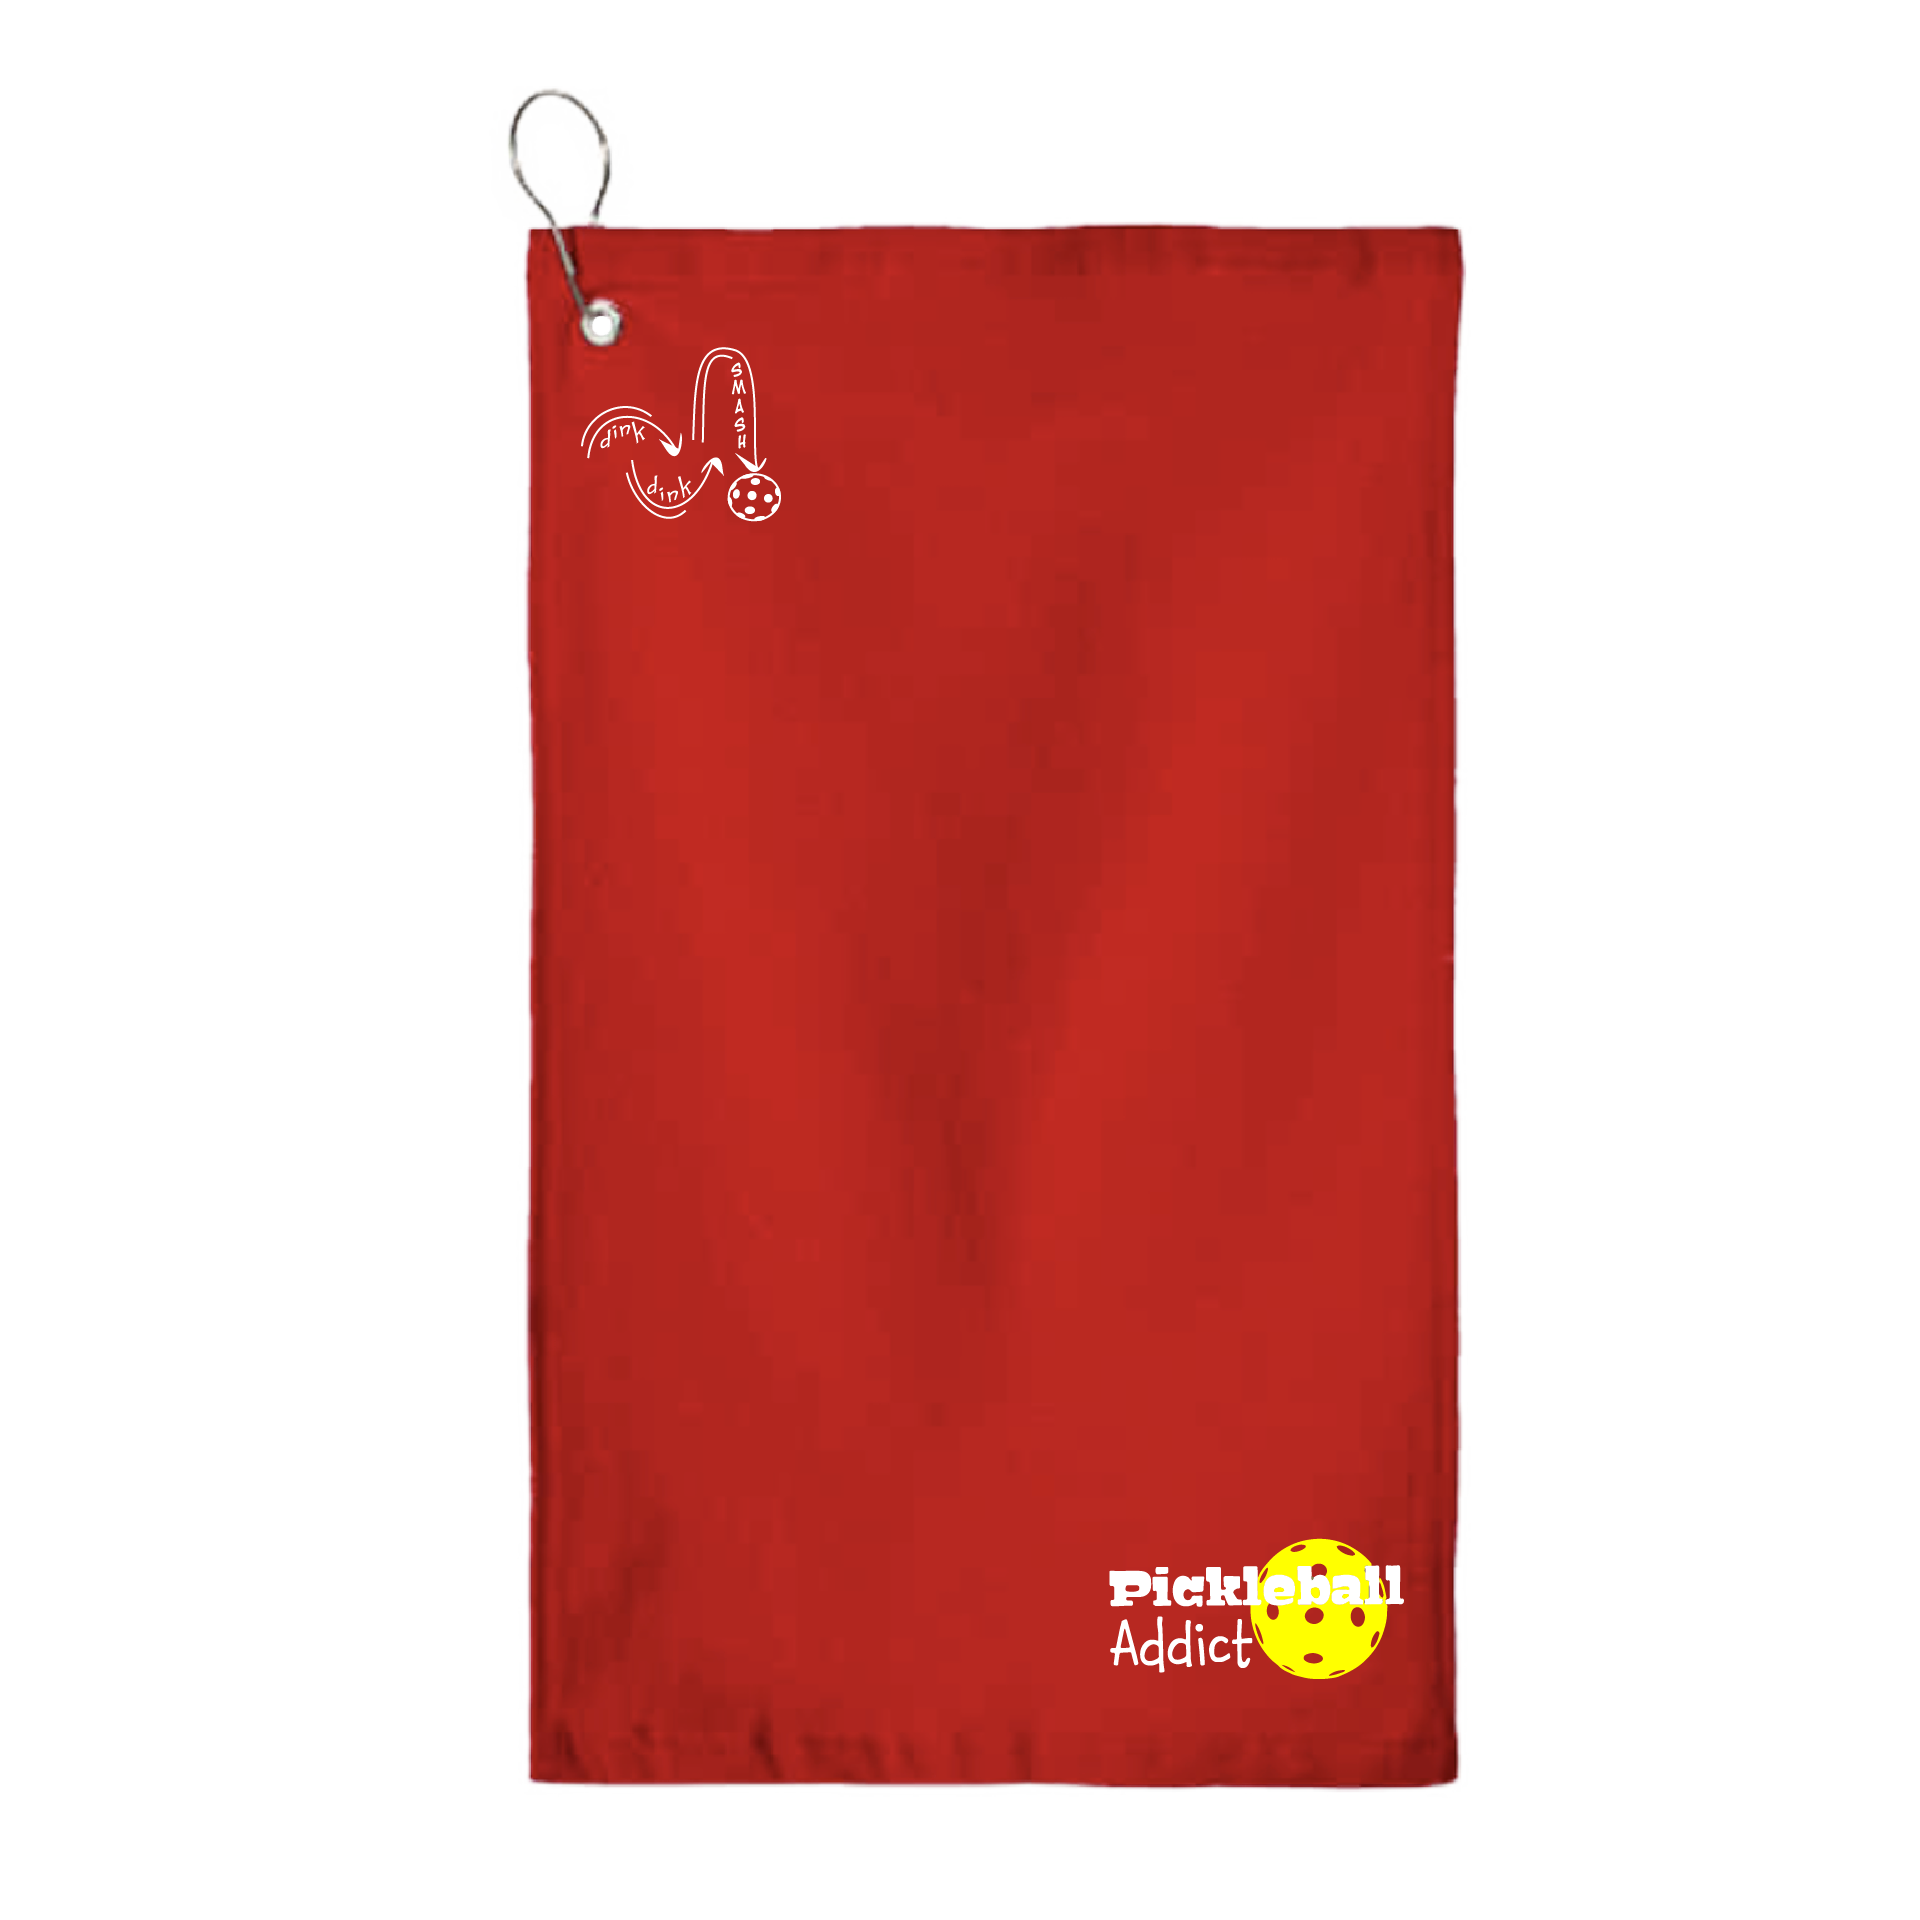 This Pickleball Addict towel is crafted with cotton terry velour for optimal performance. It features grommets, hooks, and hemmed edges for added durability. It's perfect for completing your pickleball gear, and an ideal gift for friends and tournaments. The towel is designed to be both absorbent and lightweight, so you can remain dry and comfortable while you play.